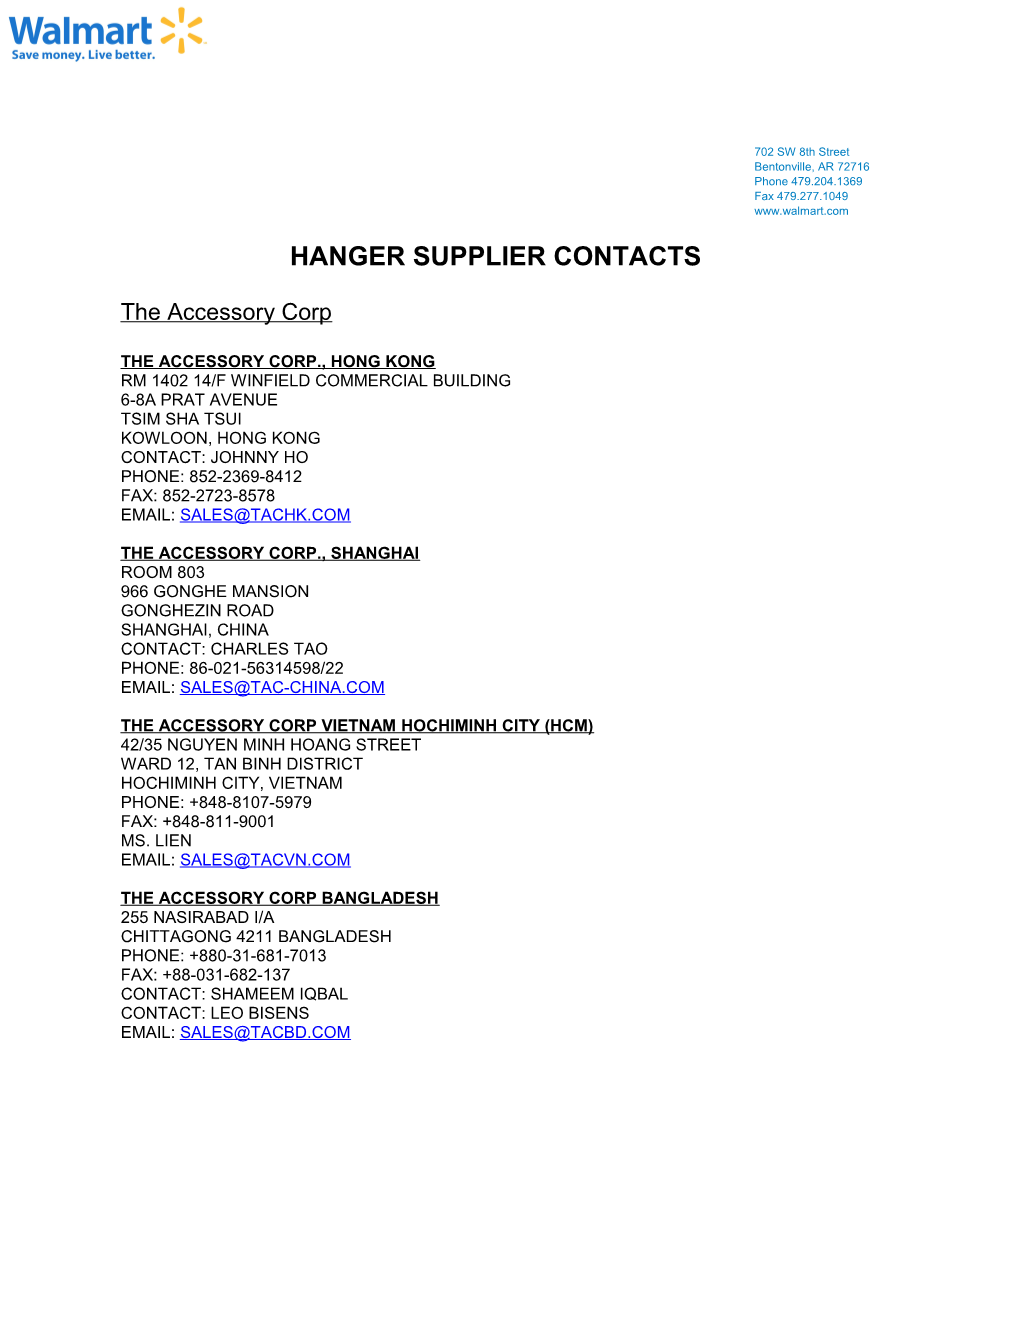 Hanger Supplier Contacts